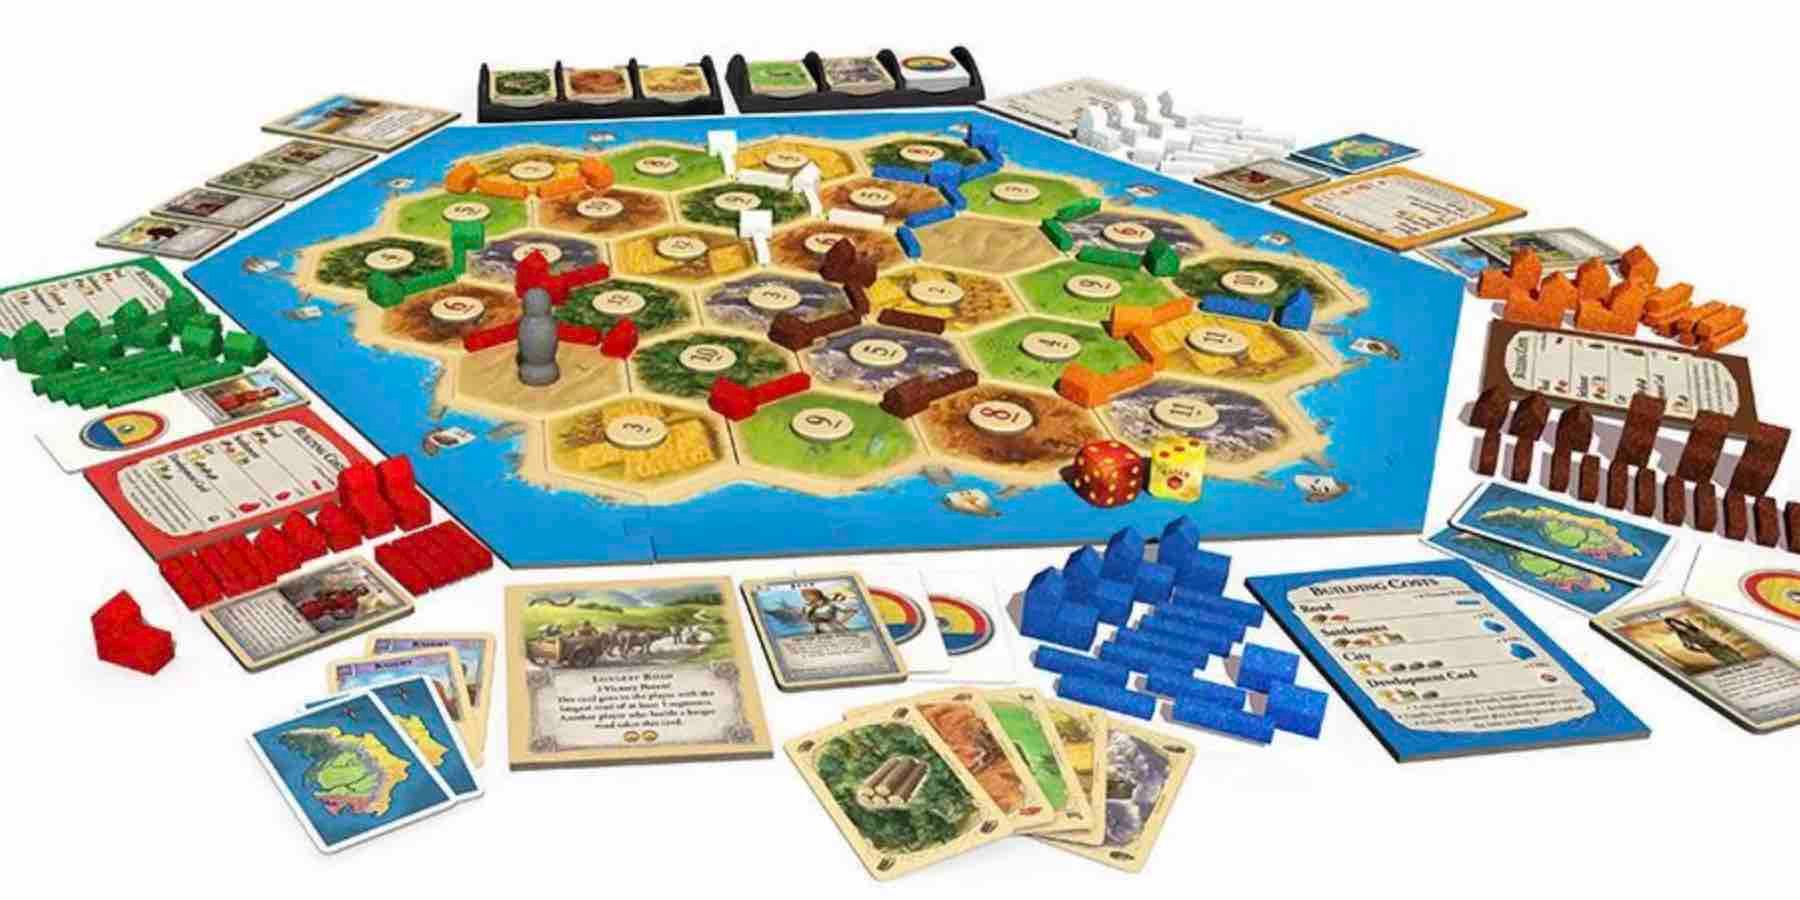 Catan board set-up and components.